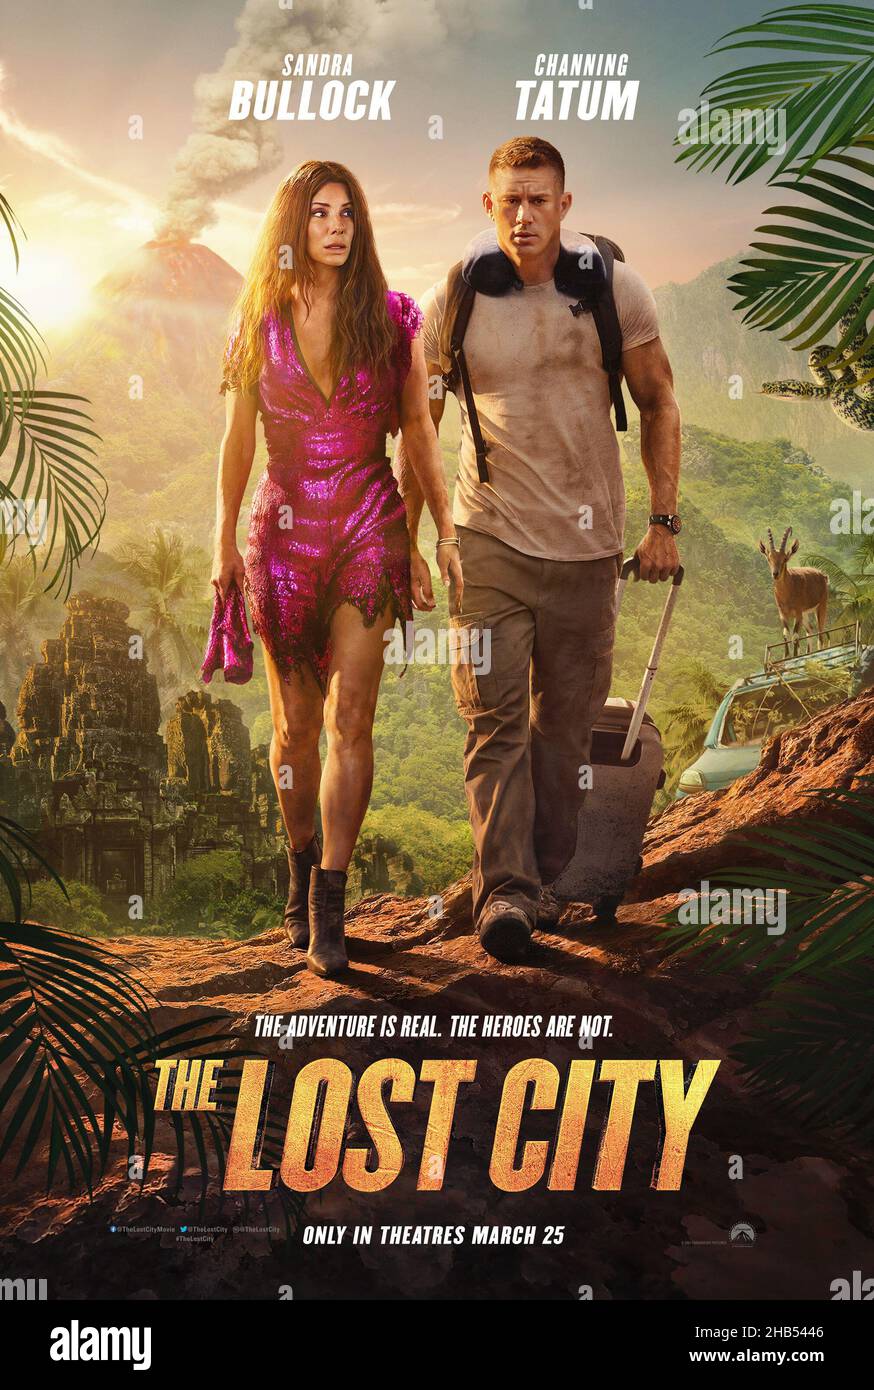 RELEASE DATE: March 25, 2022 TITLE: The Lost City. STUDIO: Paramount Pictures. DIRECTOR: Aaron Nee and Adam Nee. PLOT: A reclusive romance novelist on a book tour with her cover model gets swept up in kidnapping attempt that lands them both in a cutthroat jungle adventure. STARRING: SANDRA BULLOCK as Loretta Sage, CHANNING TATUM poster art. (Credit Image: © Paramount Pictures/Entertainment Pictures) Stock Photo